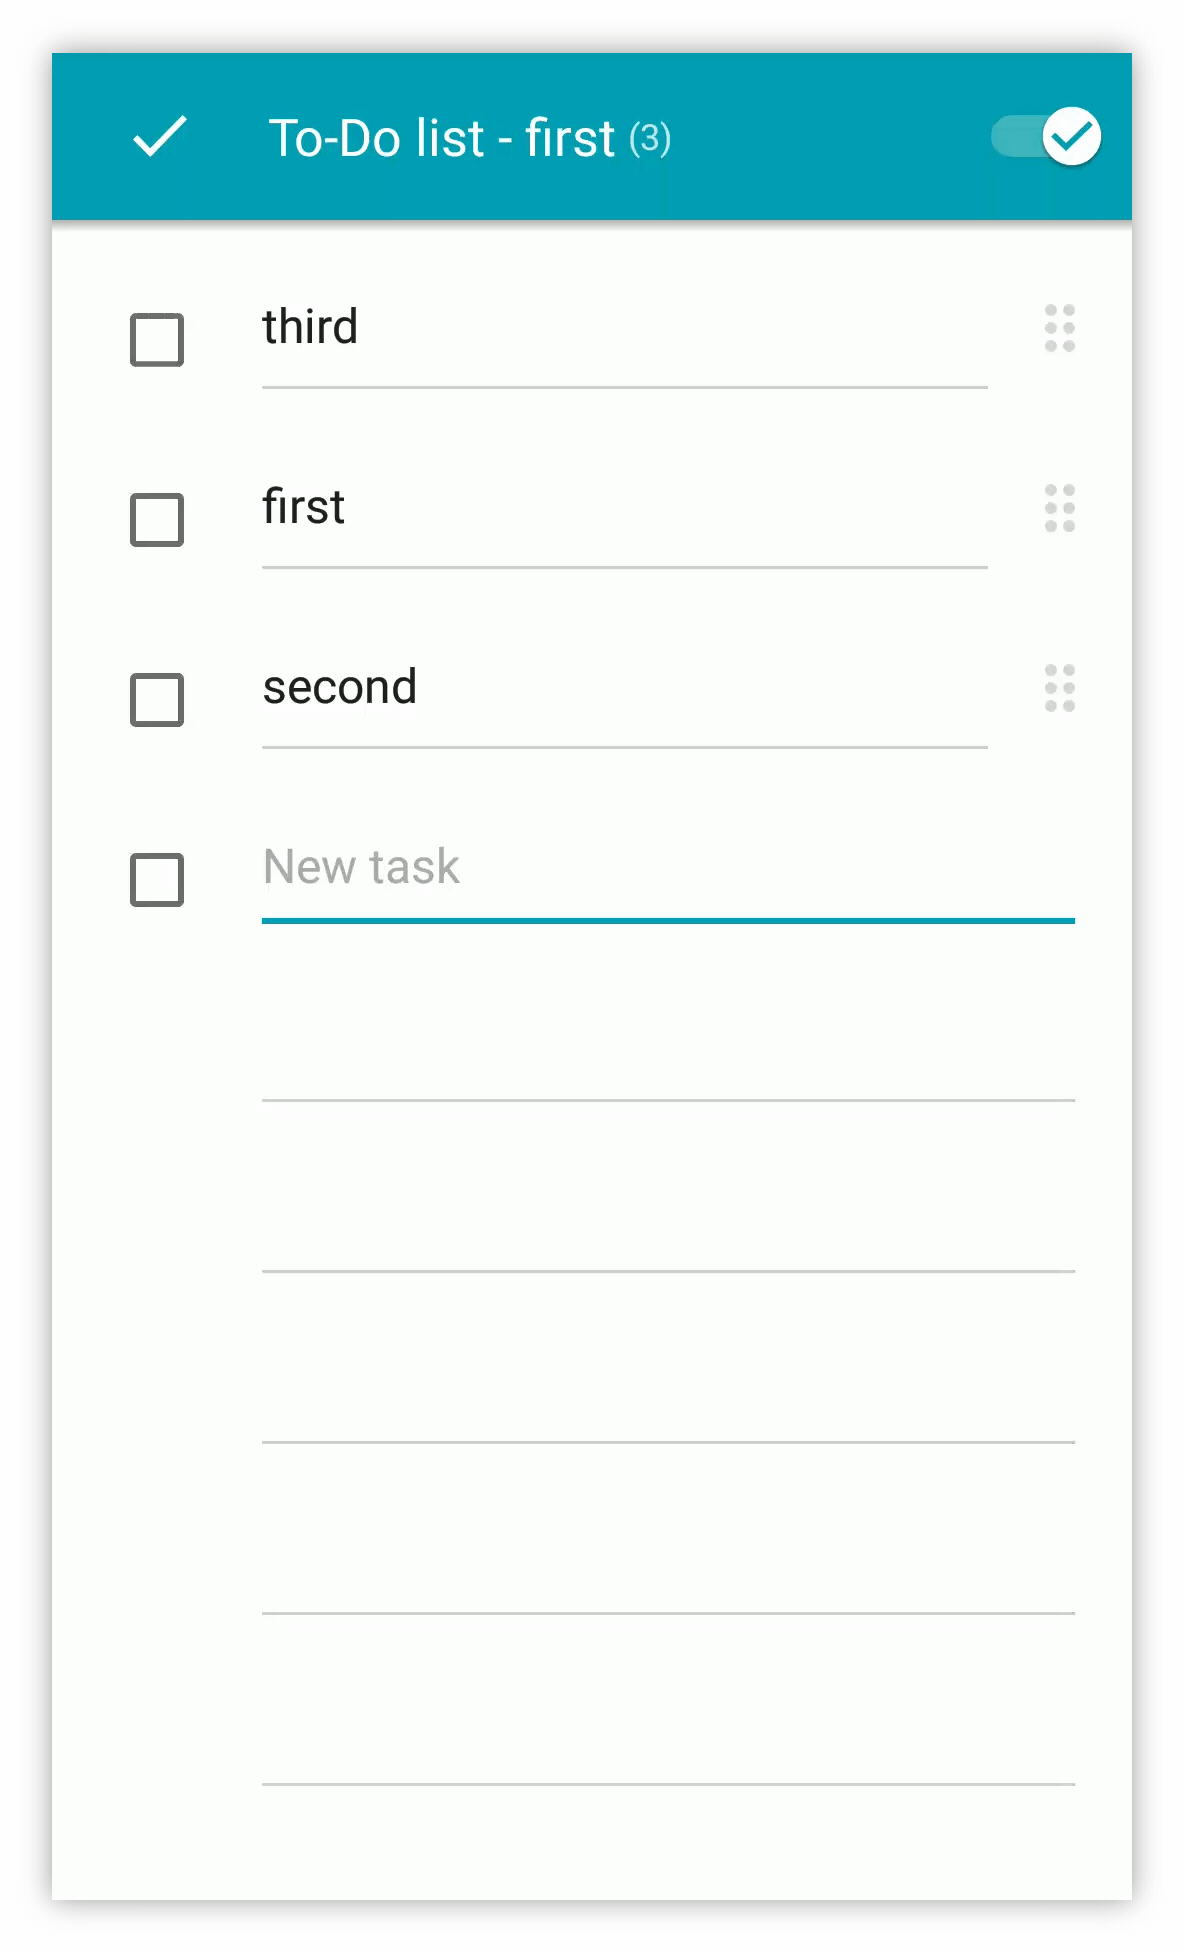 How can I move tasks in mobile clients?